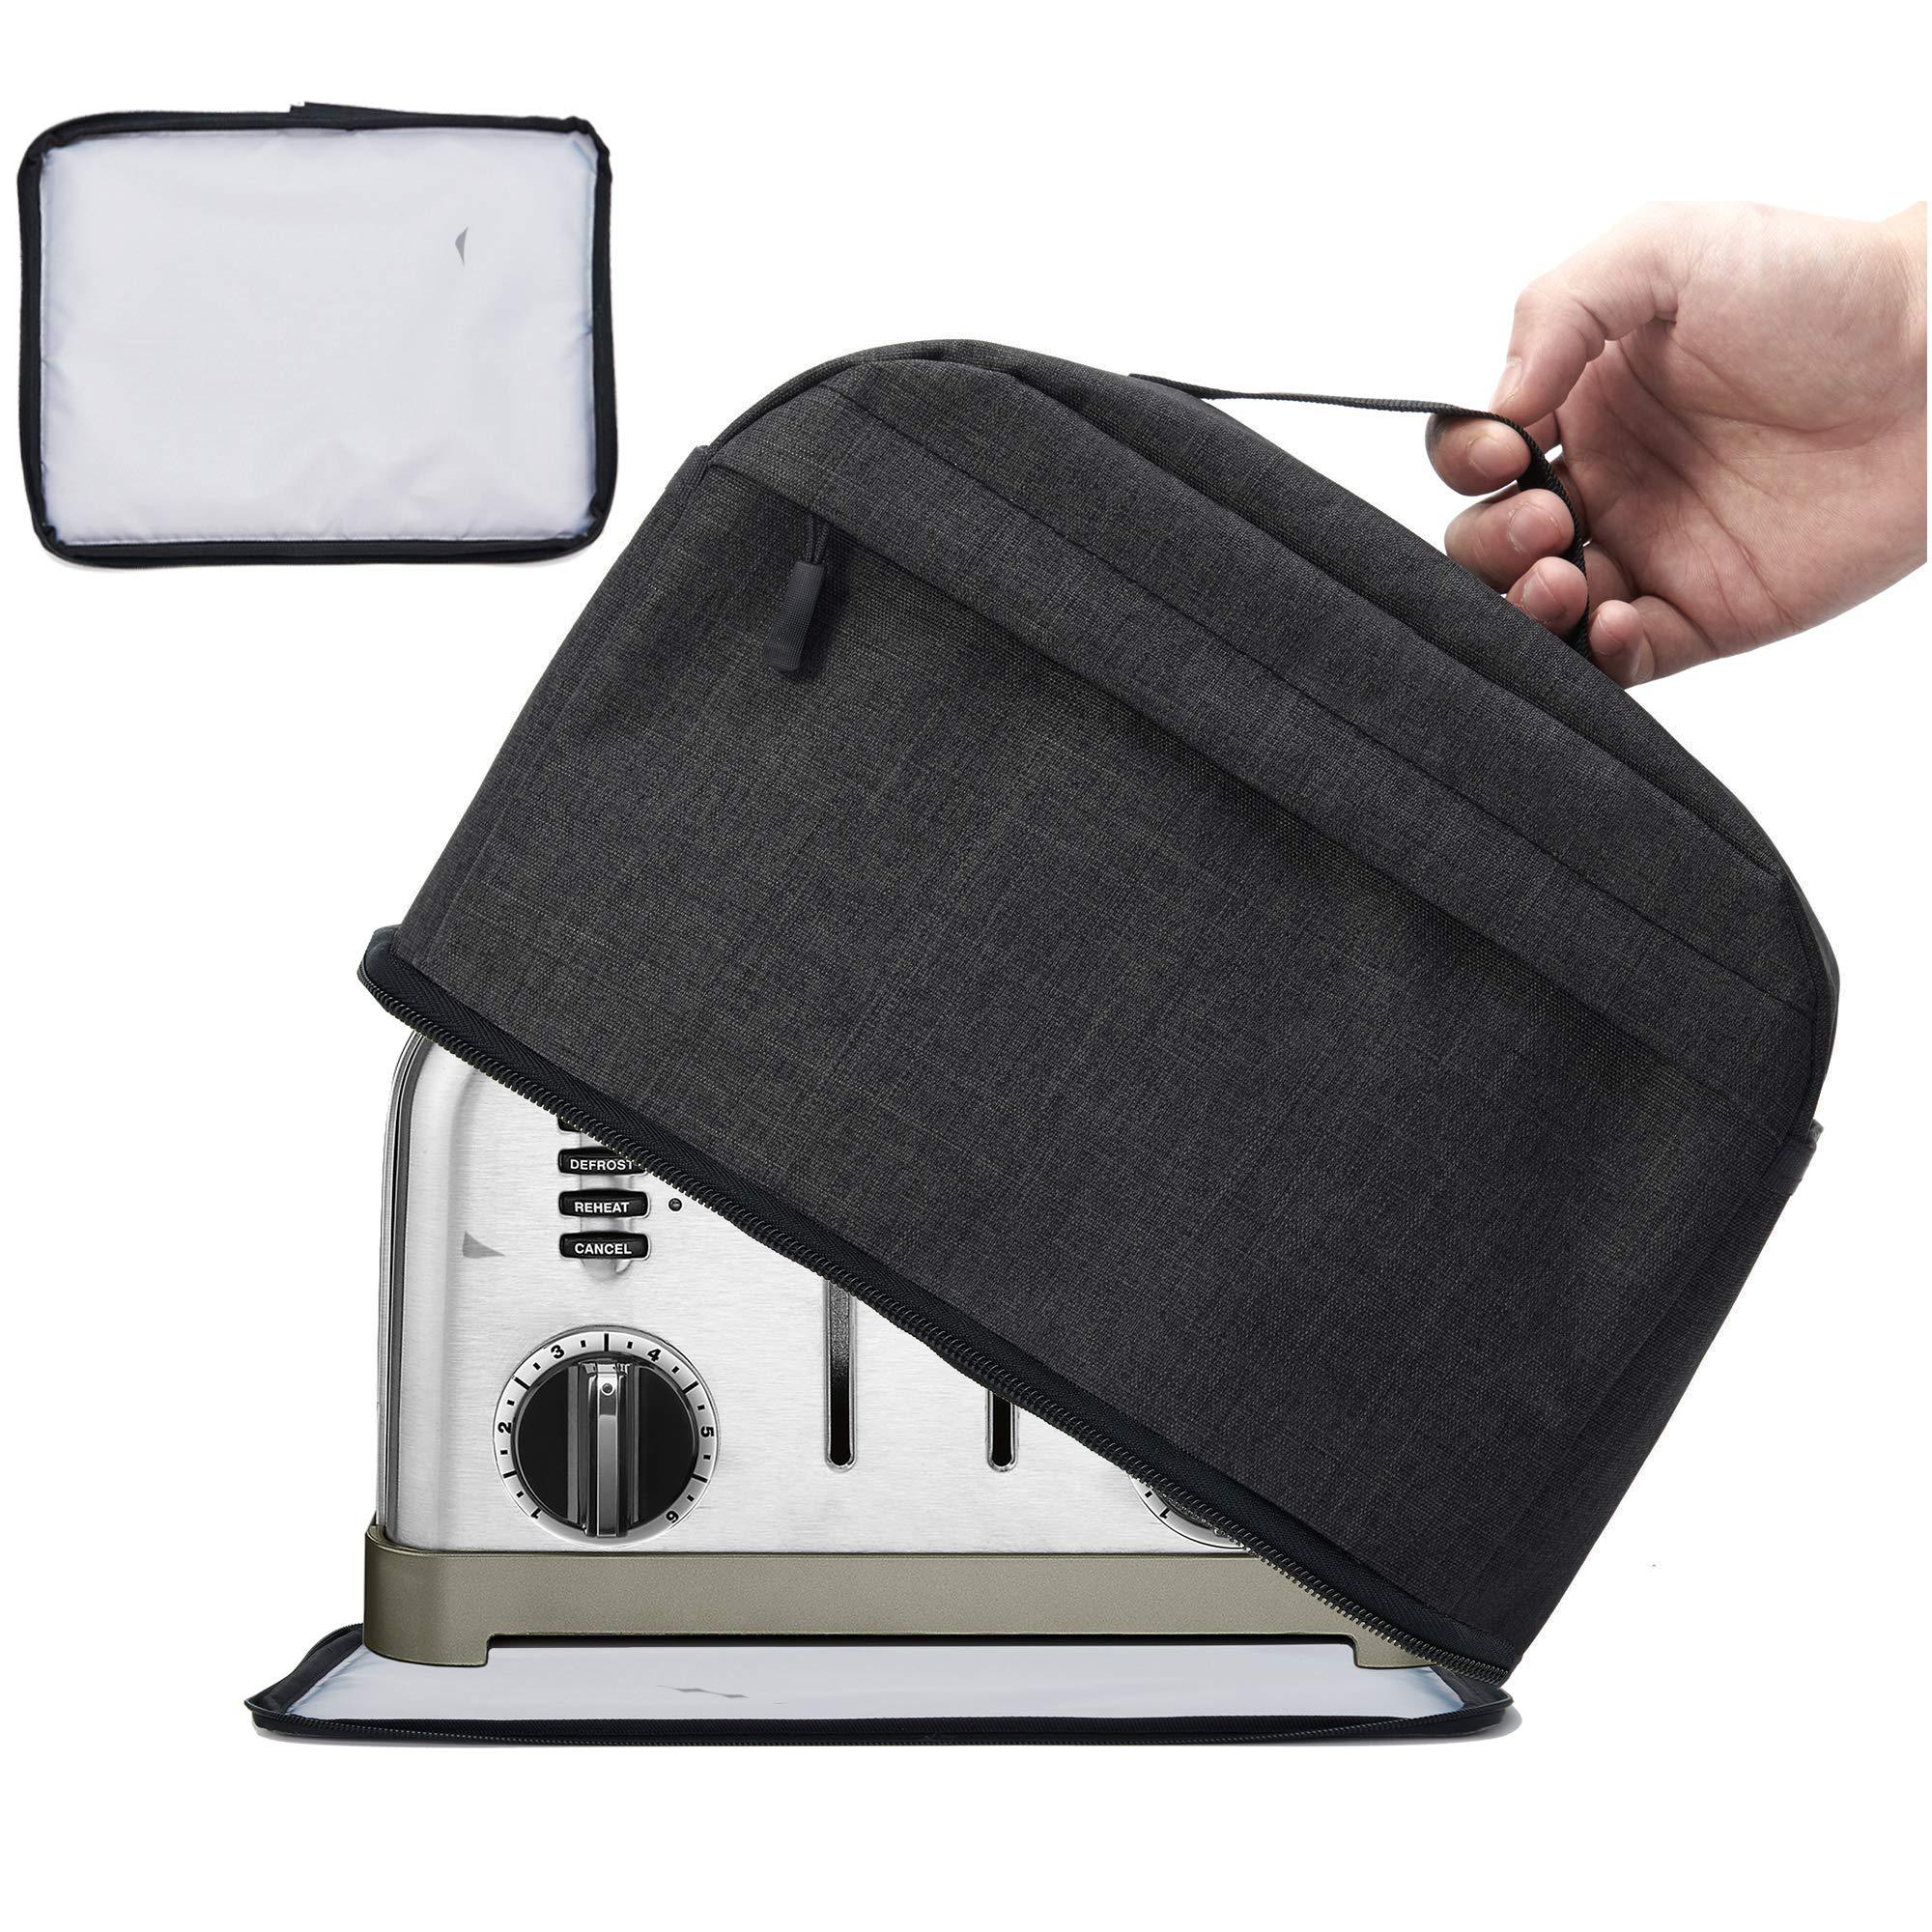 BGD vosdans 4 slice toaster cover with removable bottom 2-in-1 toaster bag with pockets toaster storage bag with handle, dust and